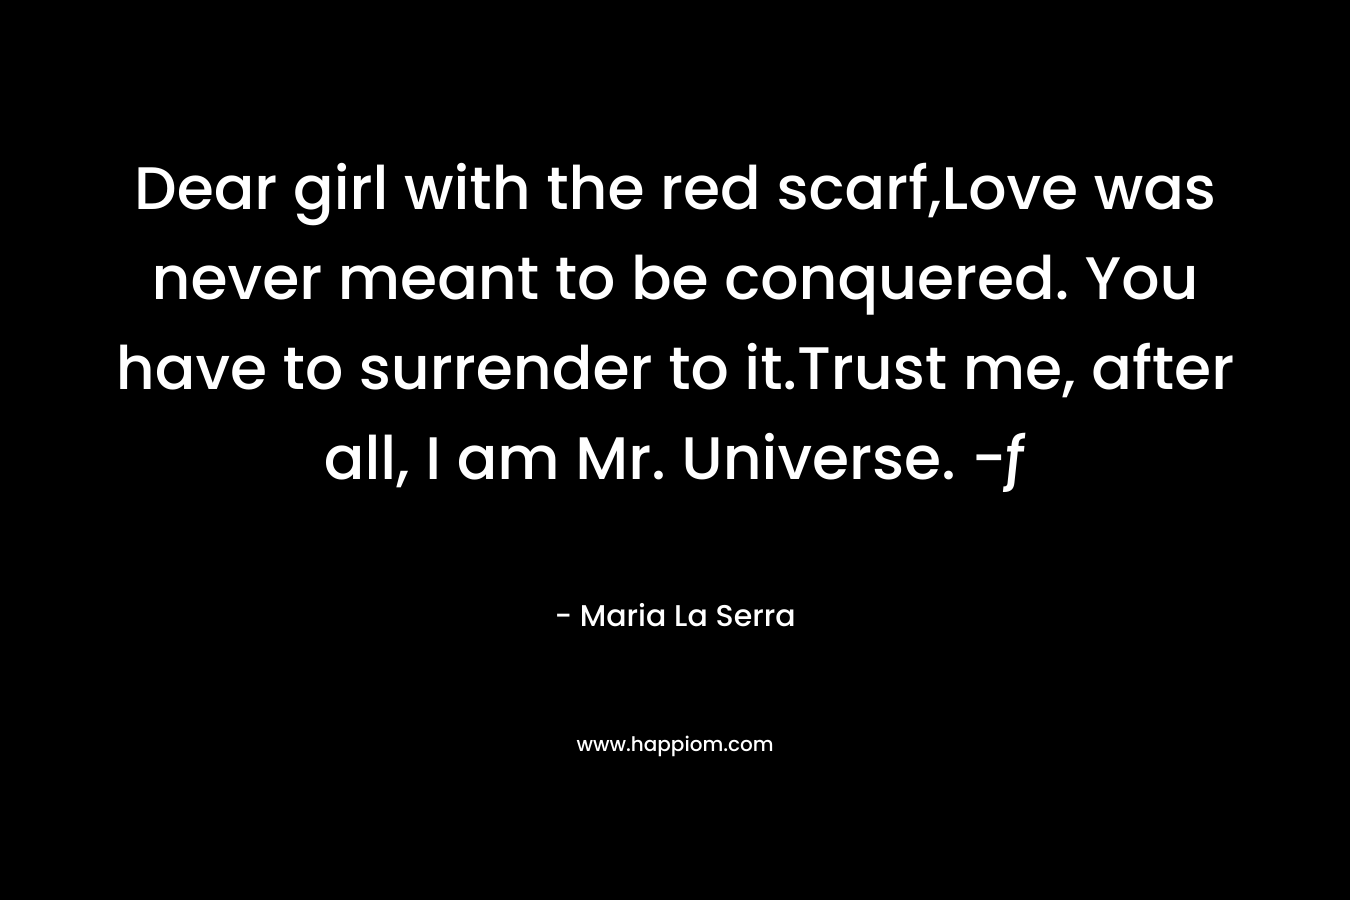 Dear girl with the red scarf,Love was never meant to be conquered. You have to surrender to it.Trust me, after all, I am Mr. Universe. -ƒ